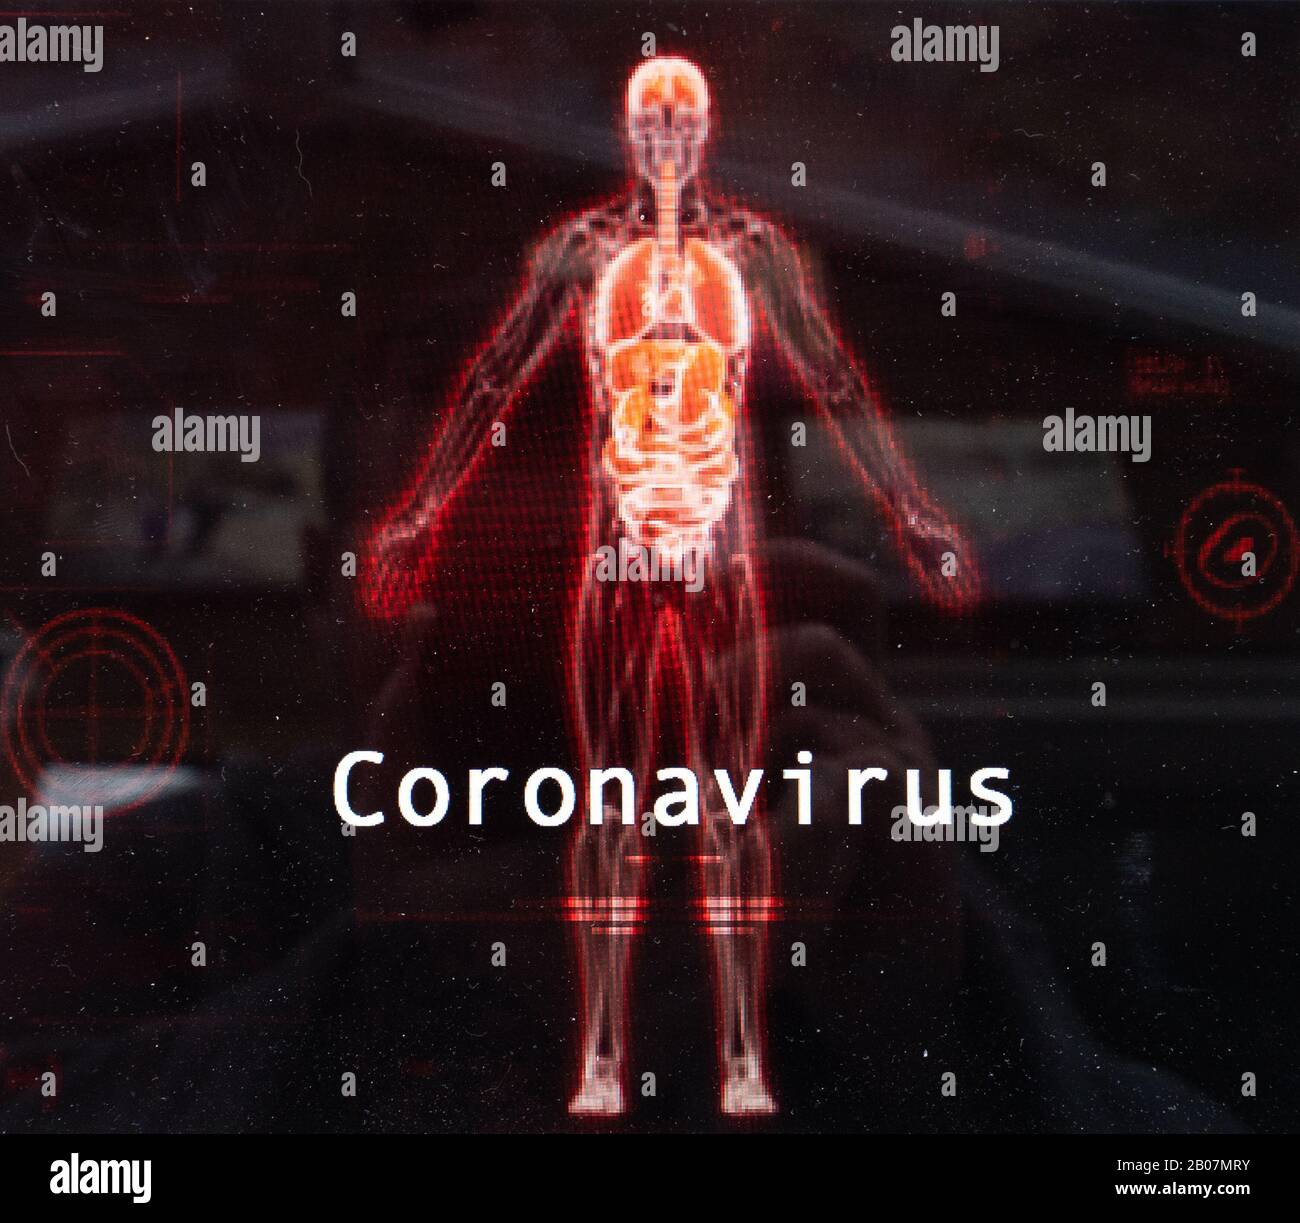 A human skeleton showing illness, the Coronavirus starting from China, family of viruses that cause flu, cold like illness and death, Wuhan, epidemic Stock Photo